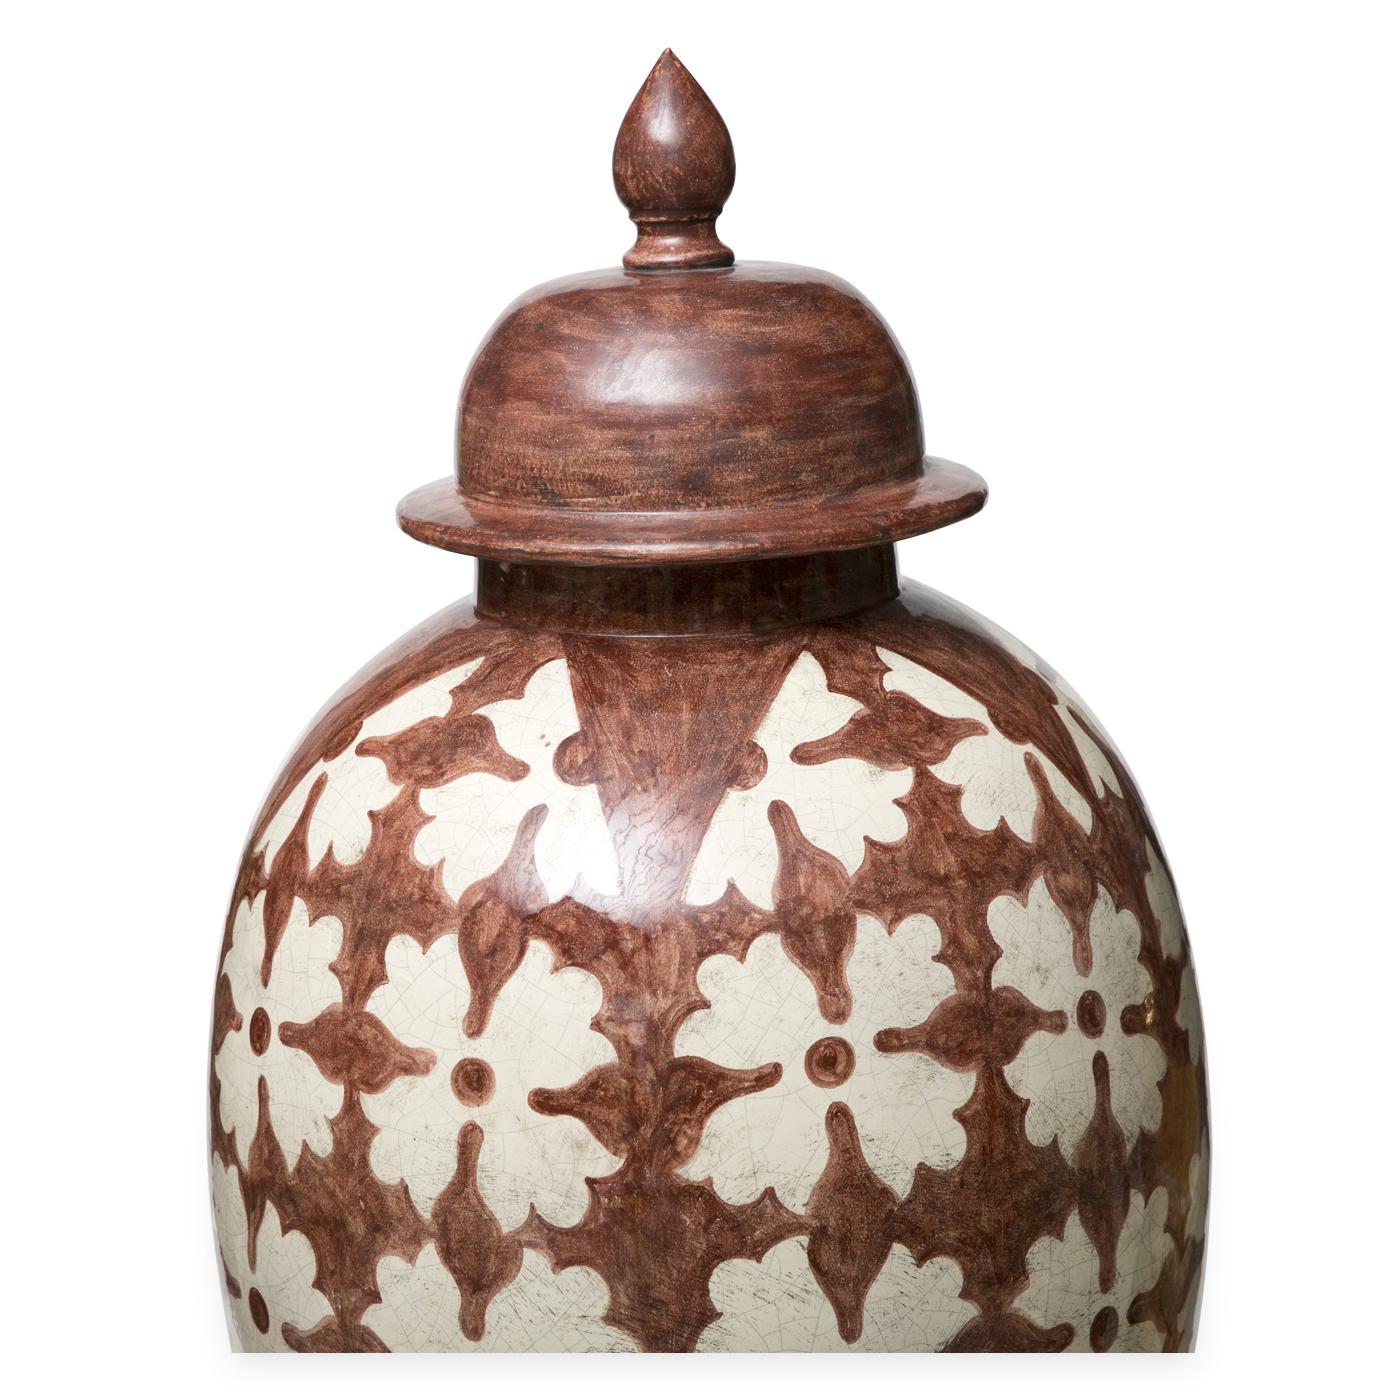 This is a decorative ceramic vase entirely handcrafted by the skilled artisans at Ceccarelli. The particular motif replicates Tuscan tiles dating the 18th century. Ceccarelli's artistic approach is best exemplified in this piece showing flawless